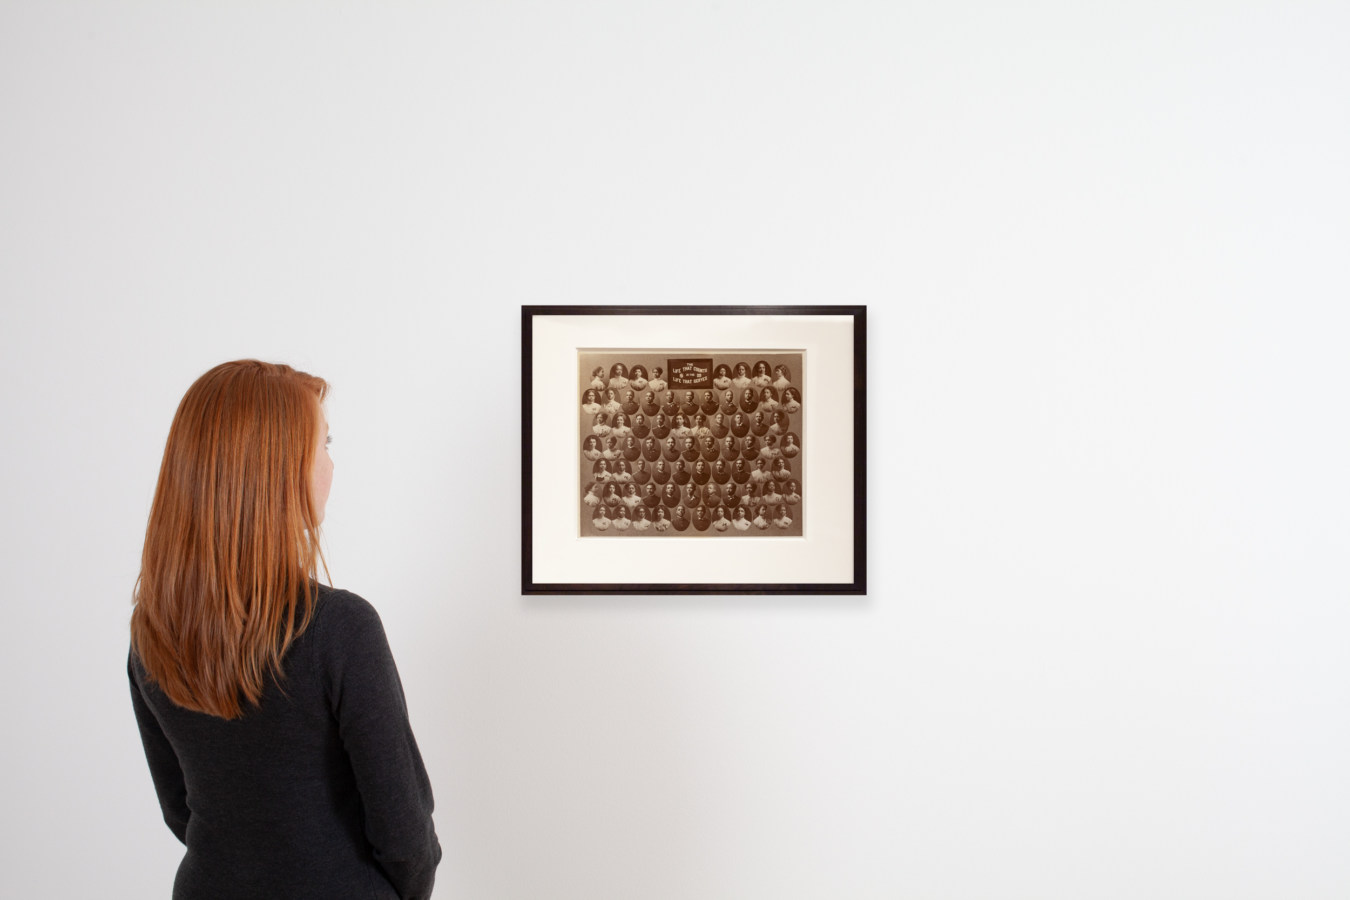 An image of a person looking at a framed photograph on a white wall